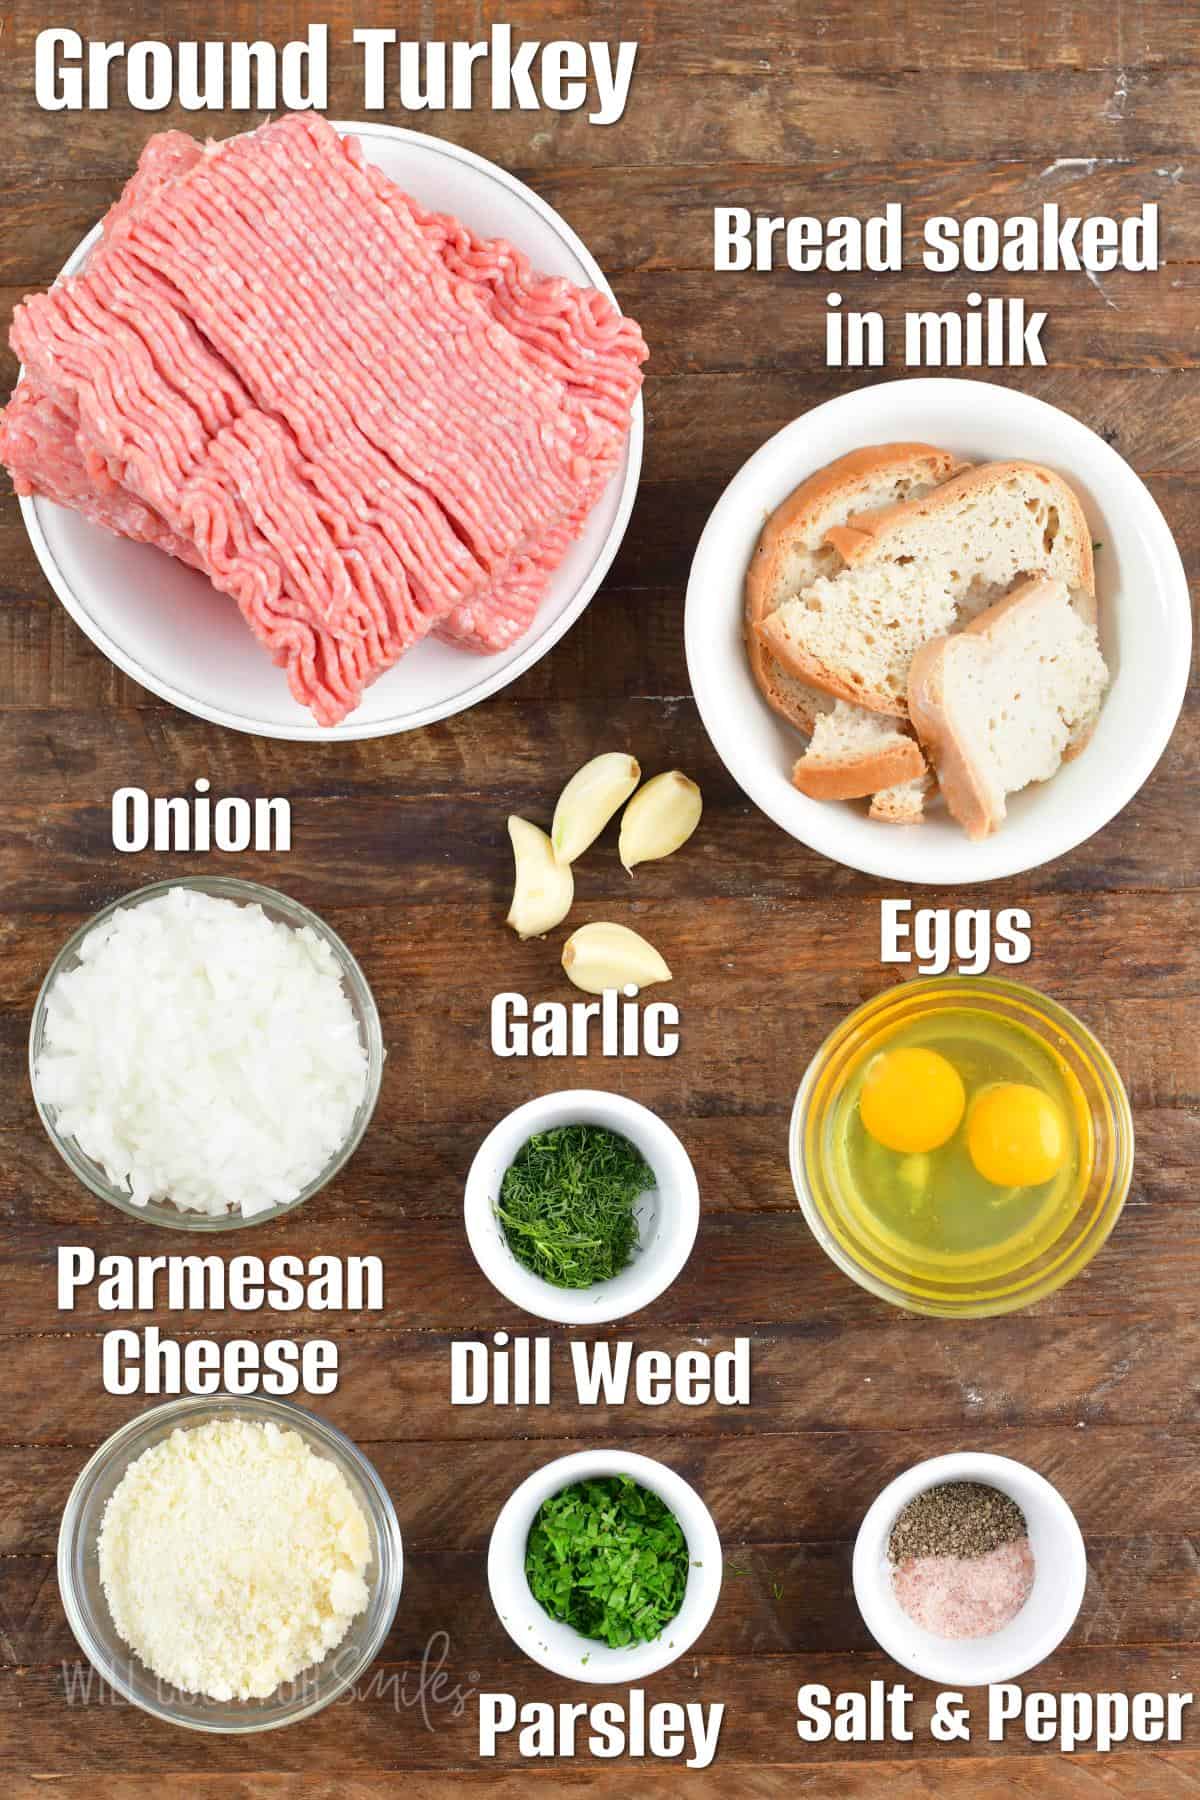 labeled ingredients to make turkey burgers on a wooden background.